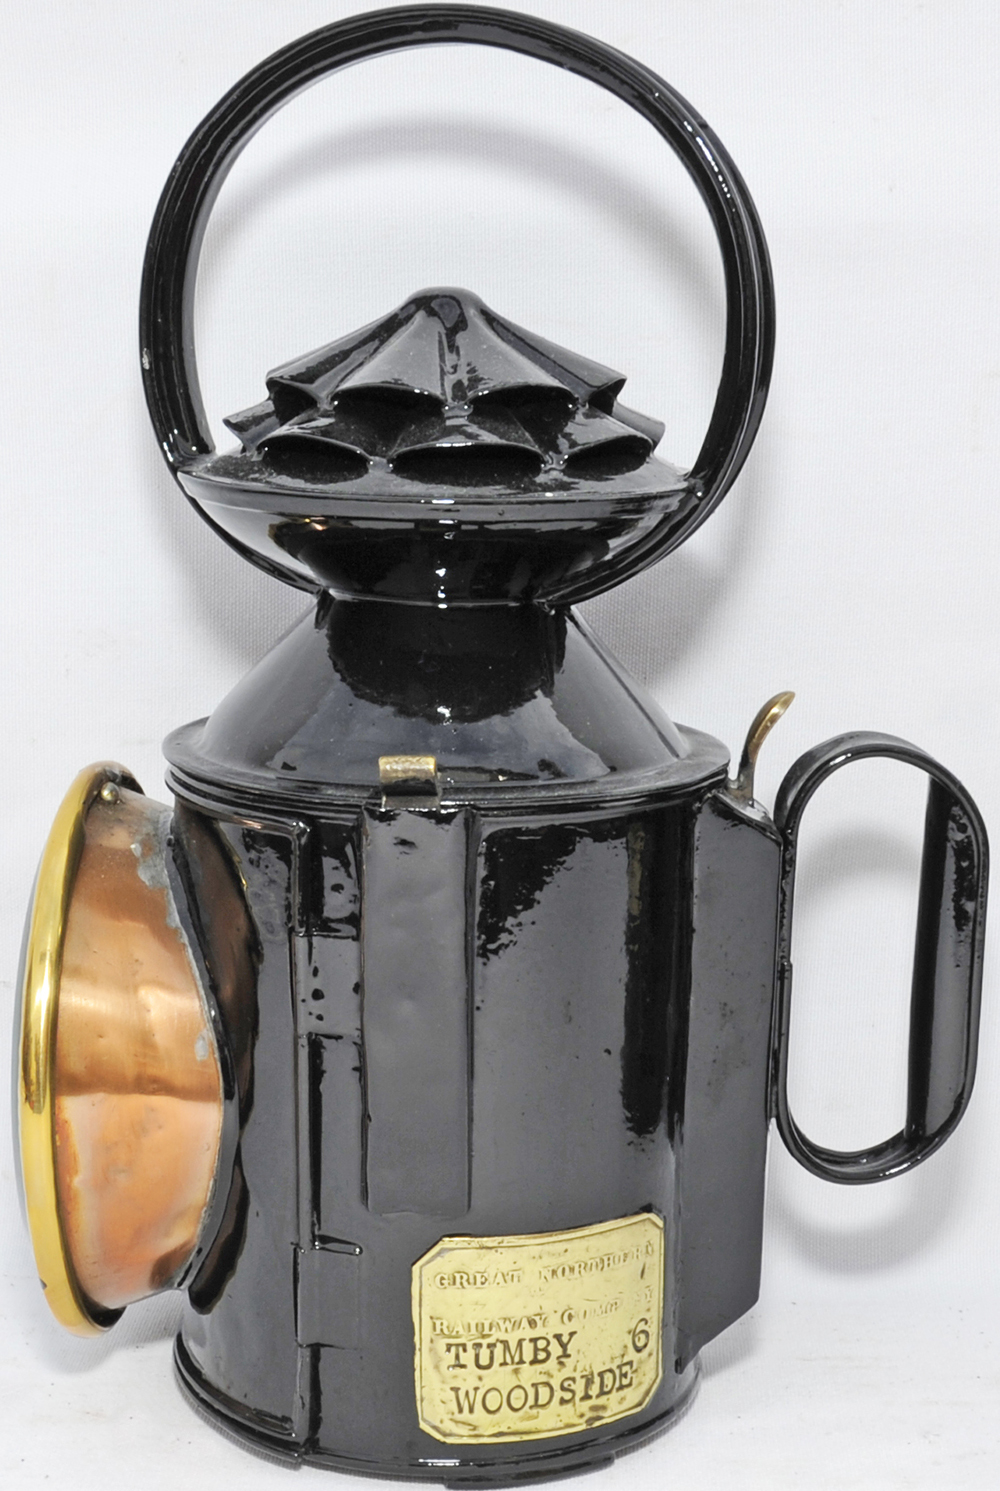 GNR double pie-crust Handlamp brass plated `Great Northern Railway TUMBY WOODSIDE 6`. Complete